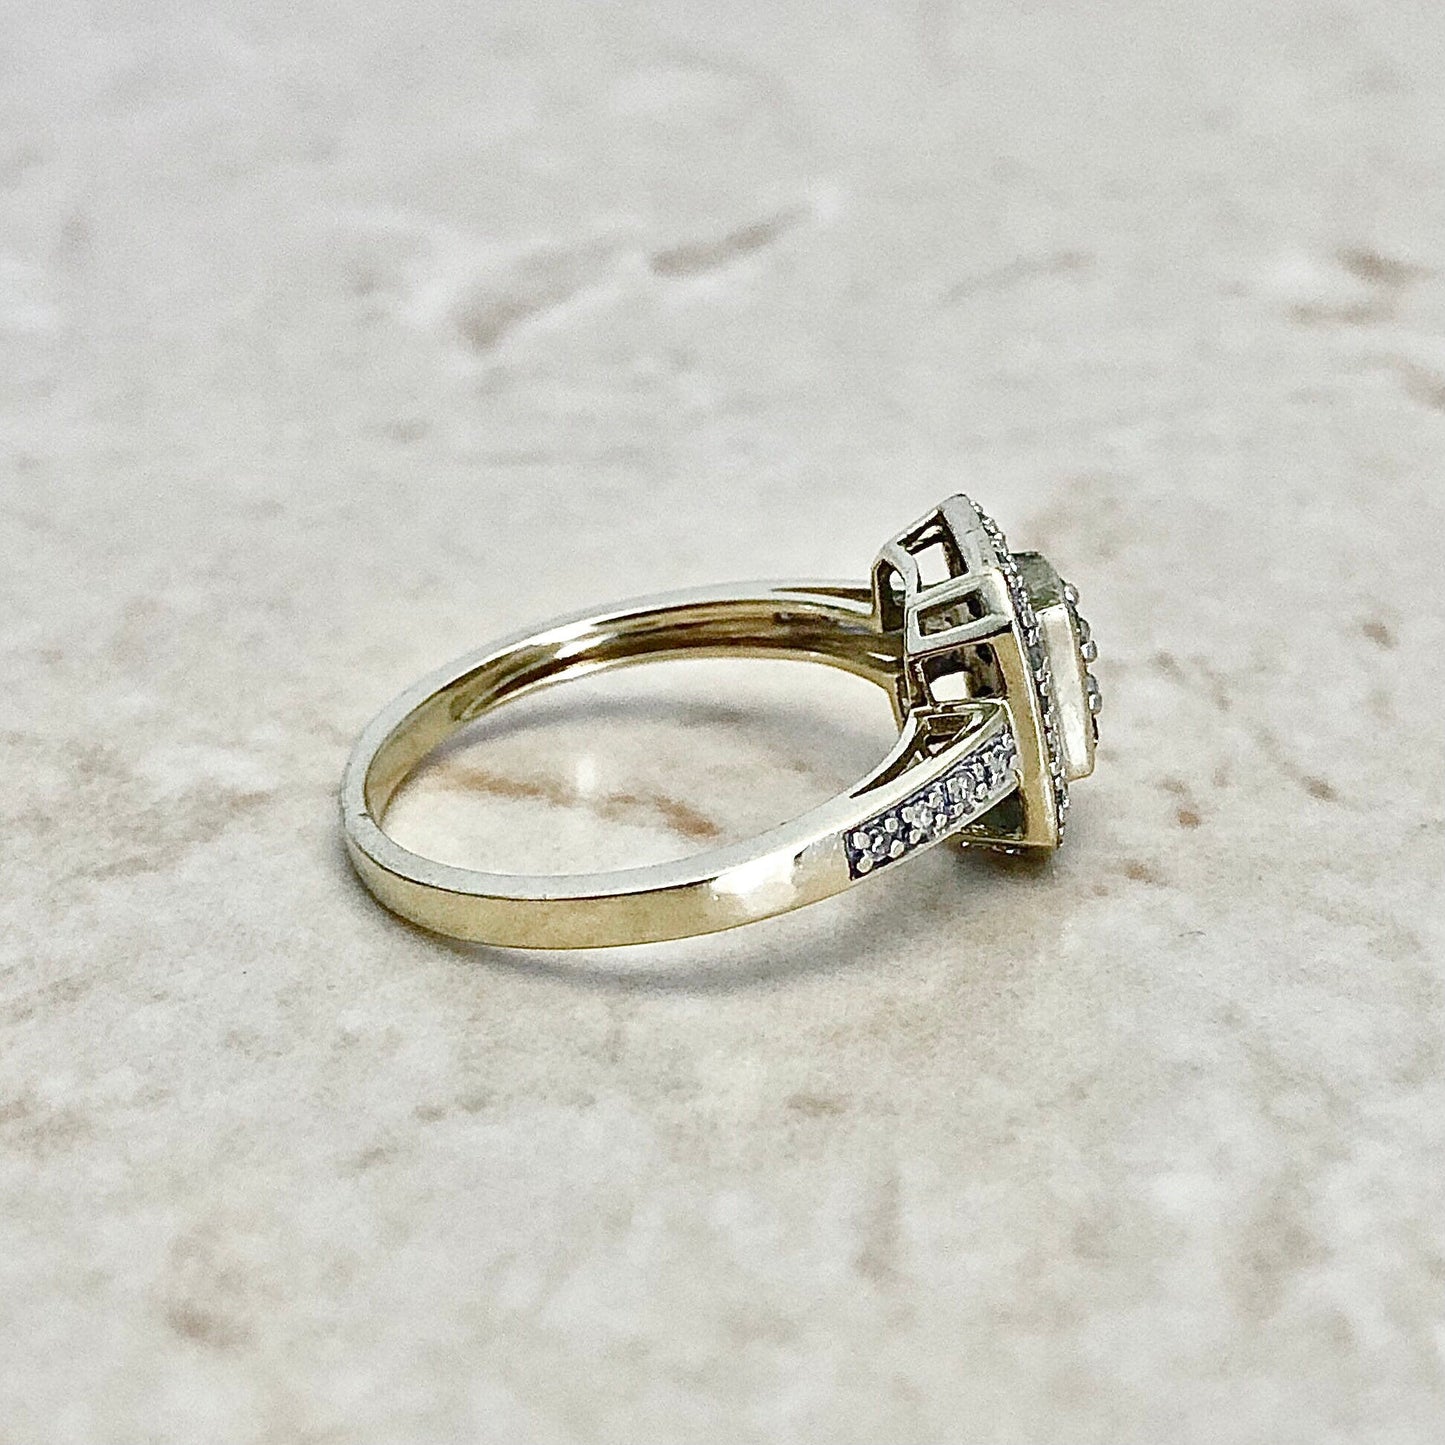 14K Pave Diamond Halo Ring - Yellow Gold - Diamond Cocktail Ring - Size 6.25 US - Birthday Gift For Her - Bridal Ring